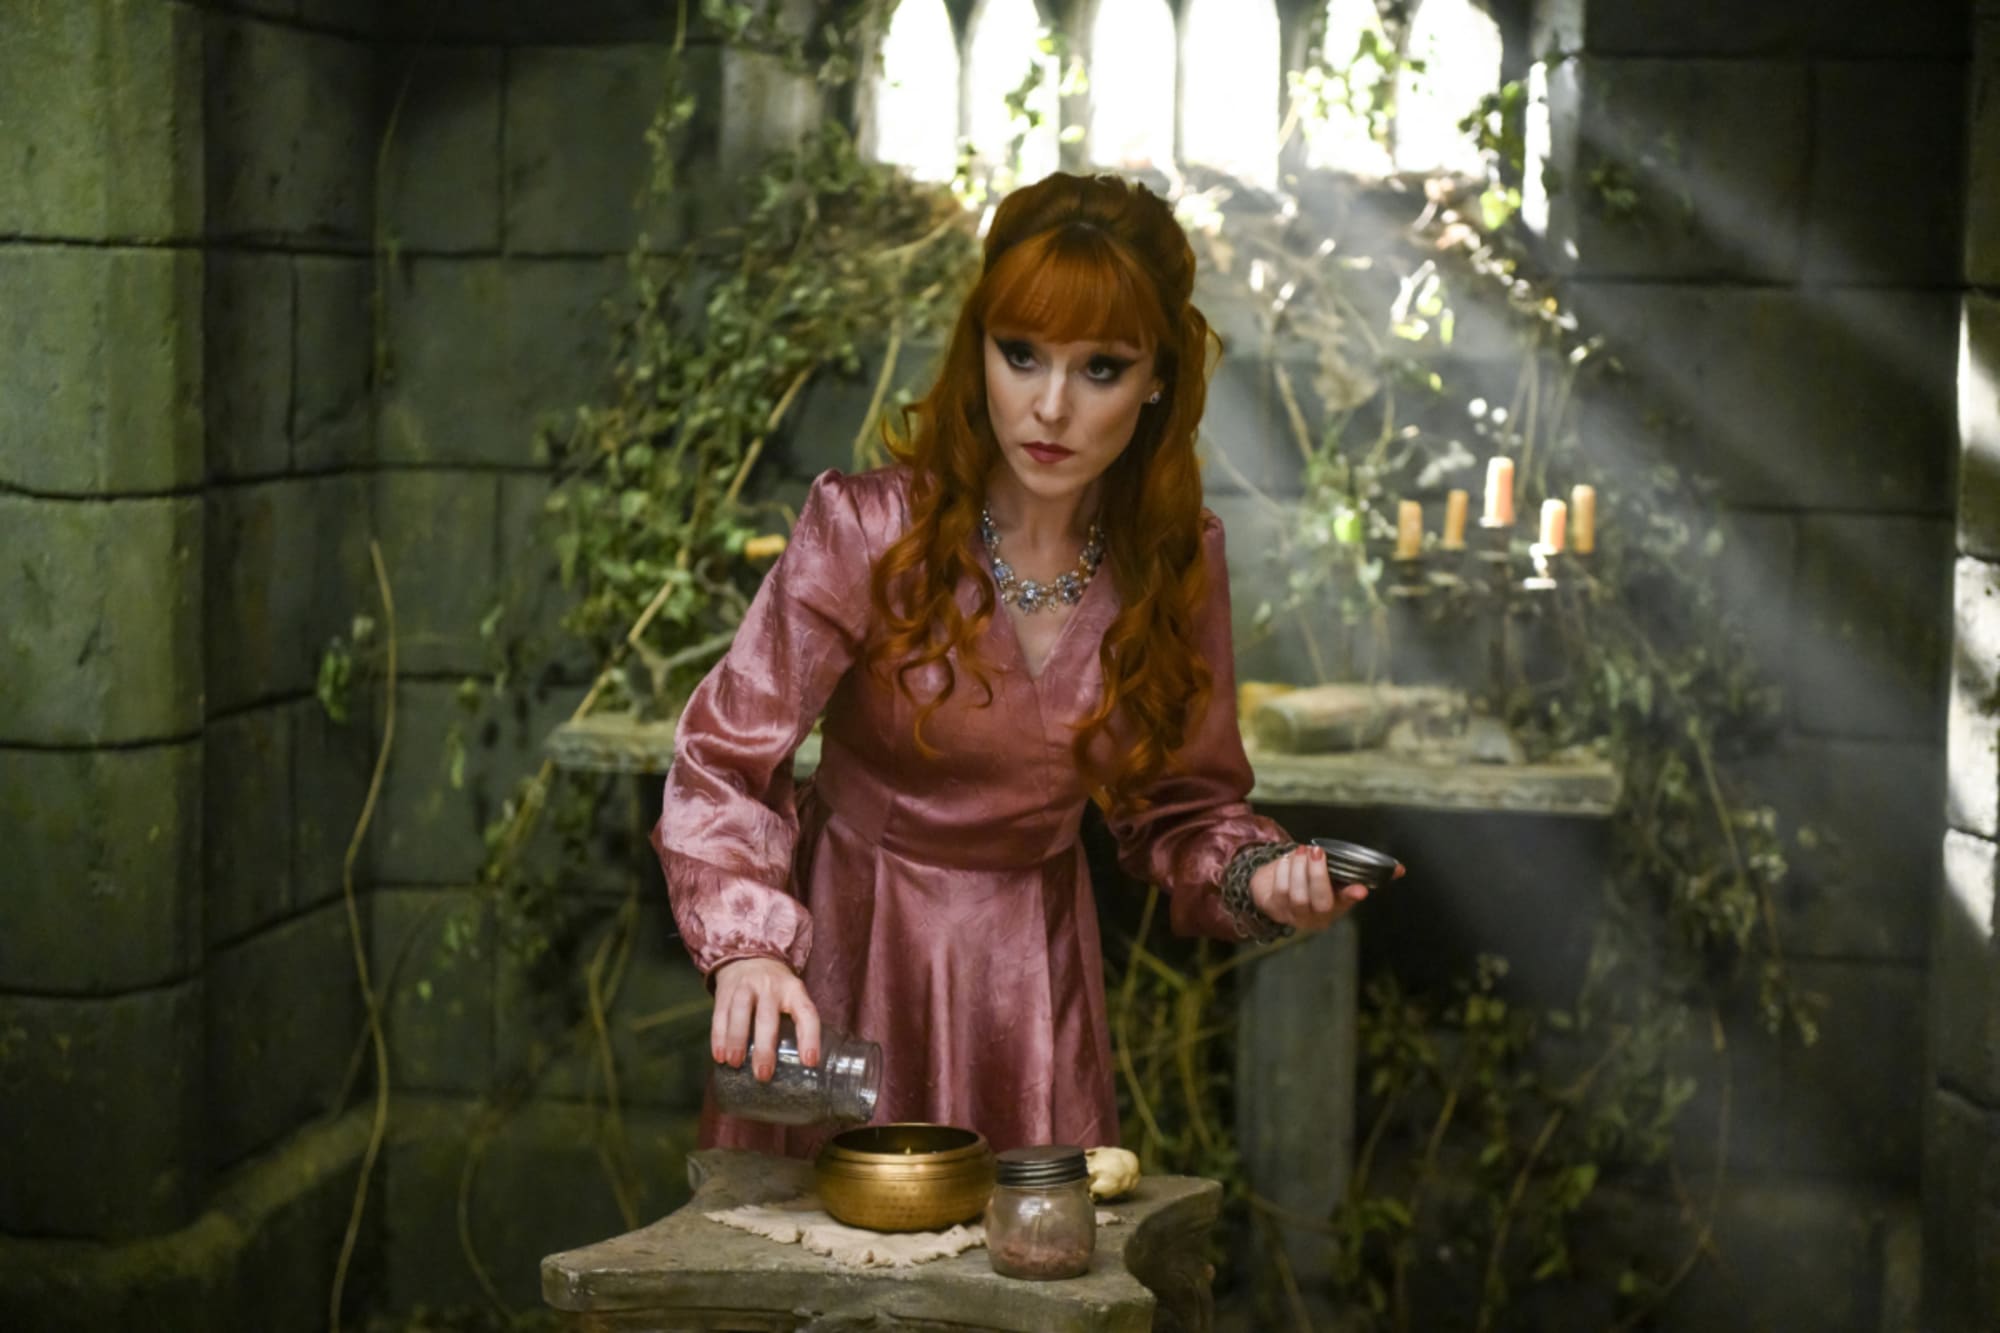 Supernatural creature of the week: Was Rowena based on a real person?